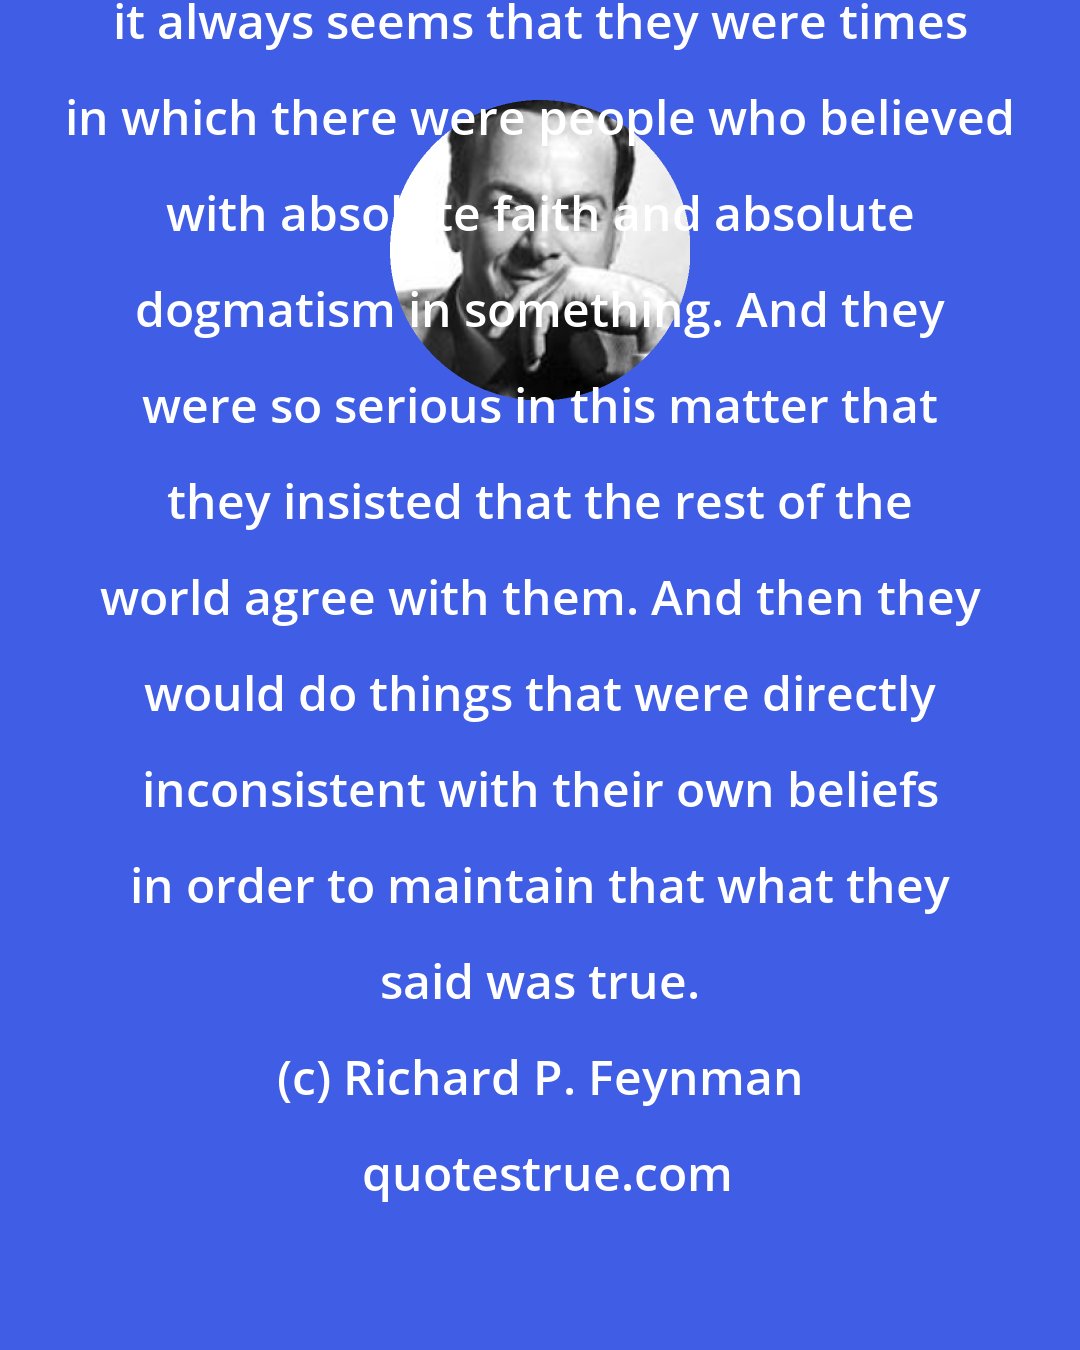 Richard P. Feynman: Looking back at the worst times, it always seems that they were times in which there were people who believed with absolute faith and absolute dogmatism in something. And they were so serious in this matter that they insisted that the rest of the world agree with them. And then they would do things that were directly inconsistent with their own beliefs in order to maintain that what they said was true.